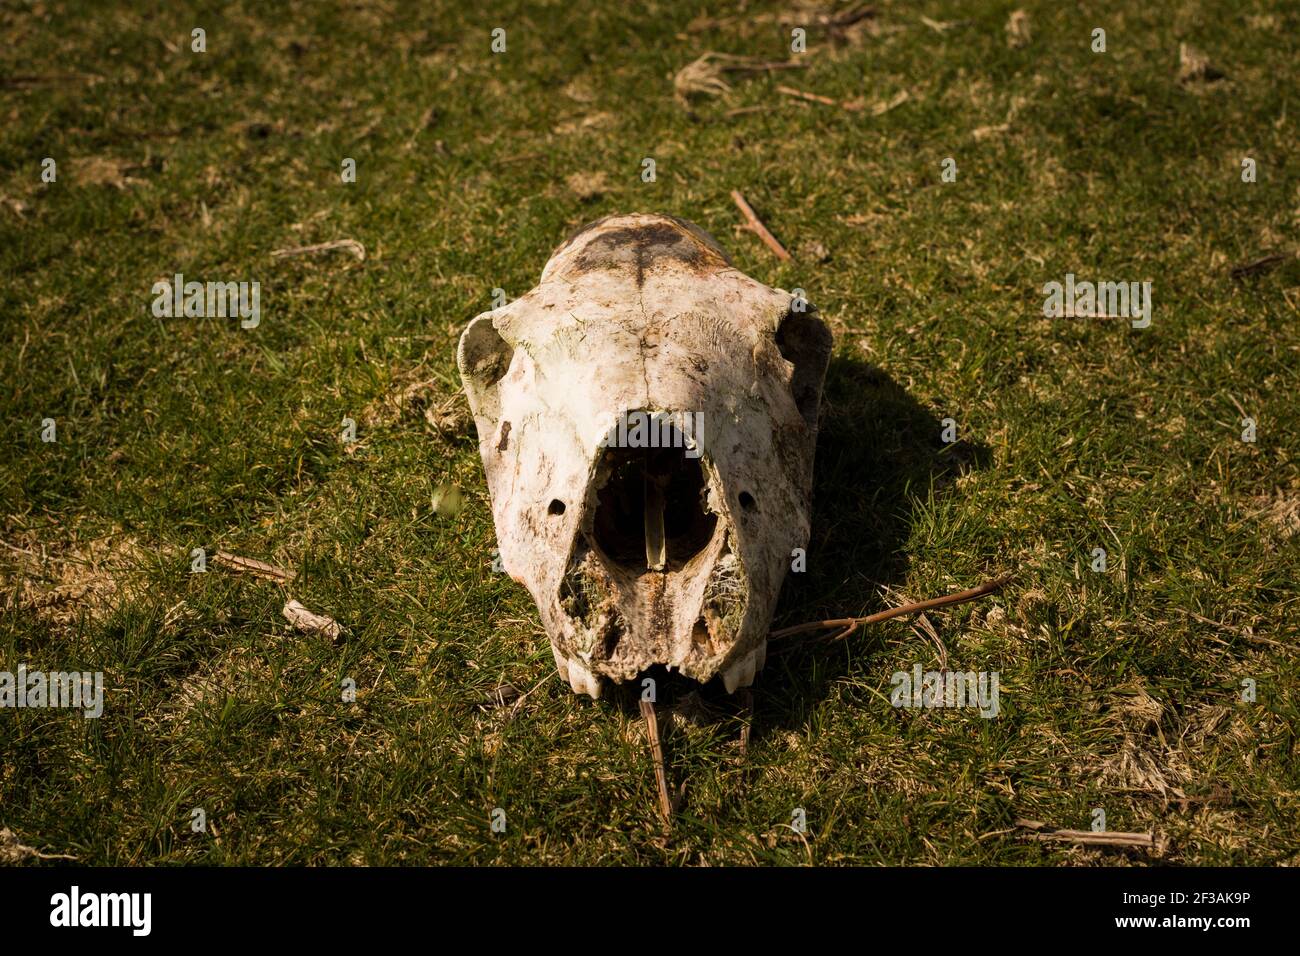 Decomposing Horse skull lays in a meadow grass field Stock Photo